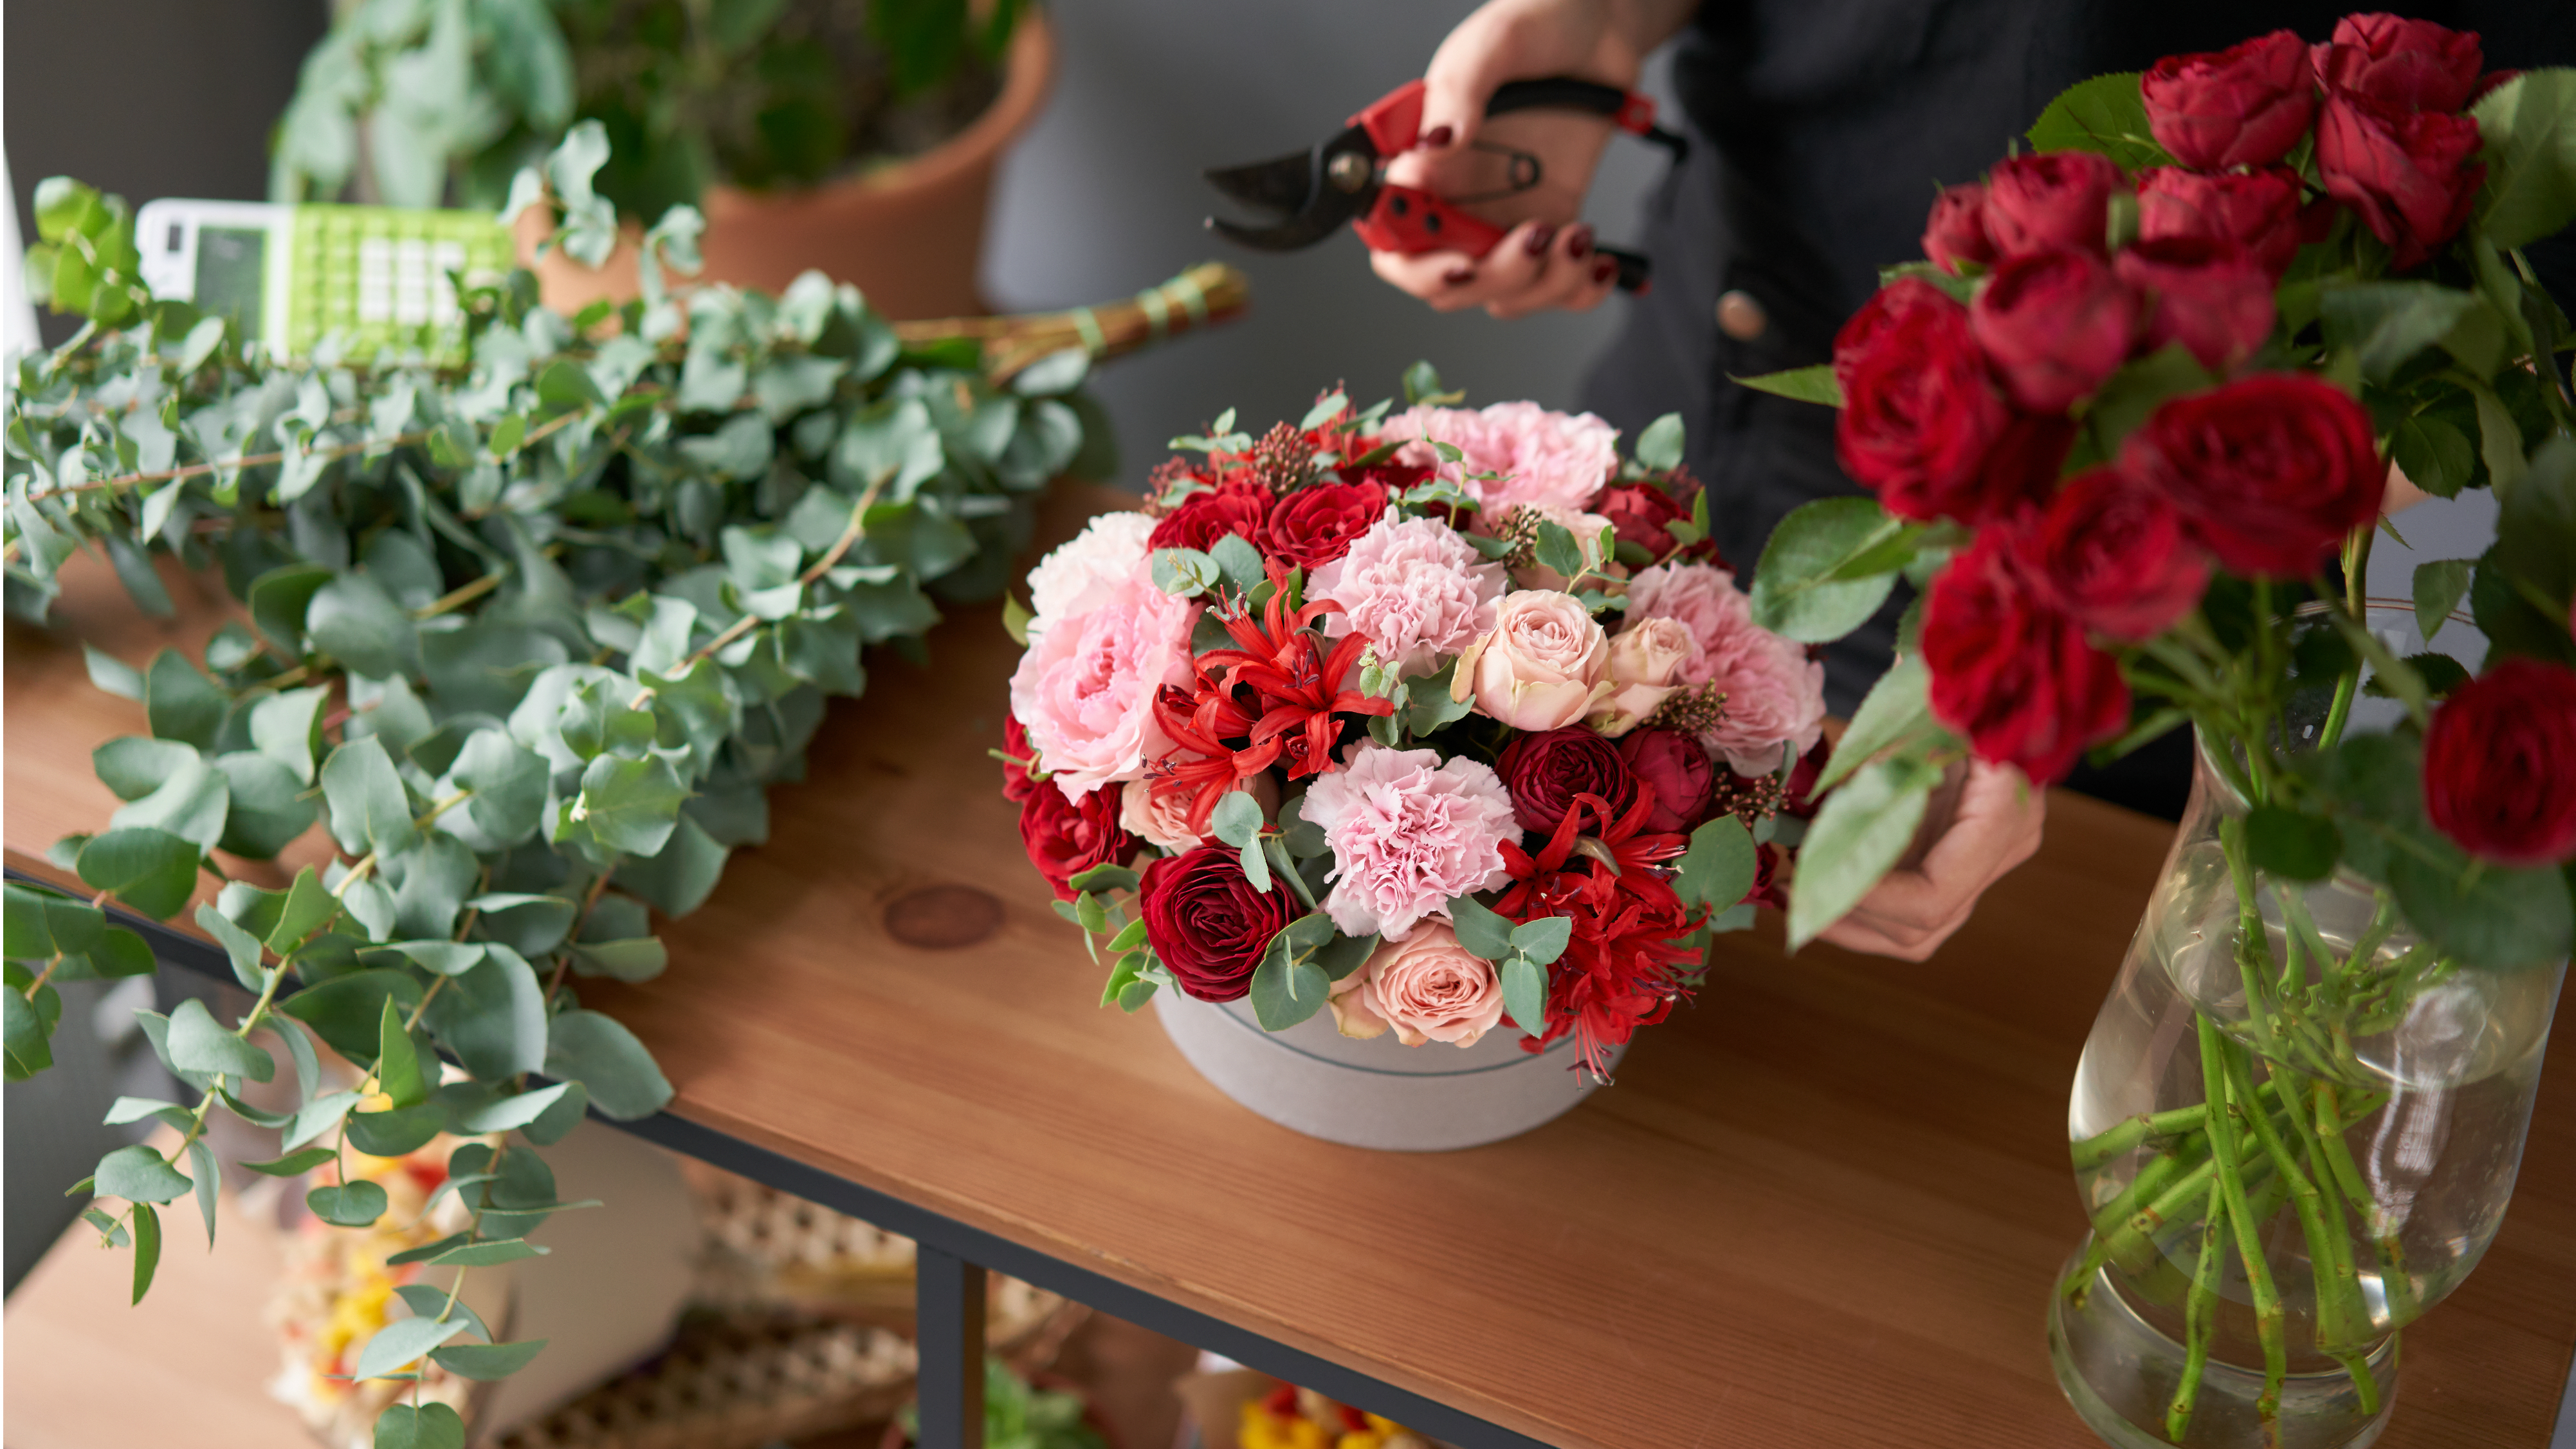 Buying Florist From Online Flower Shops